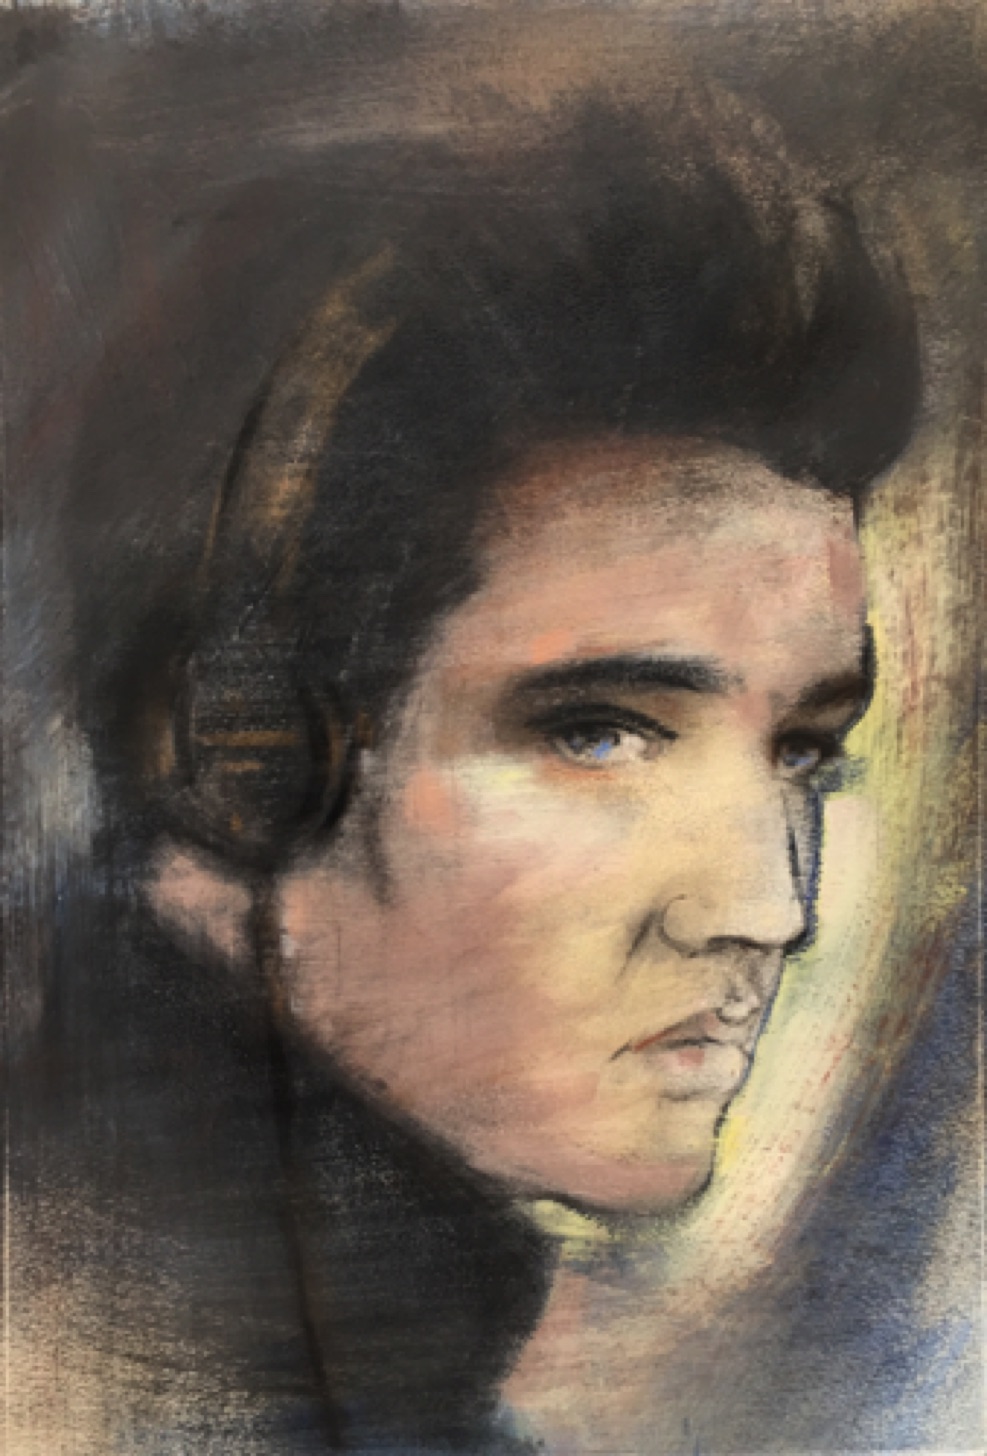 Gregg Chadwick
The King's Laurels (Elvis With Headphones)
14"x12" pastel and gouache on paper 2021